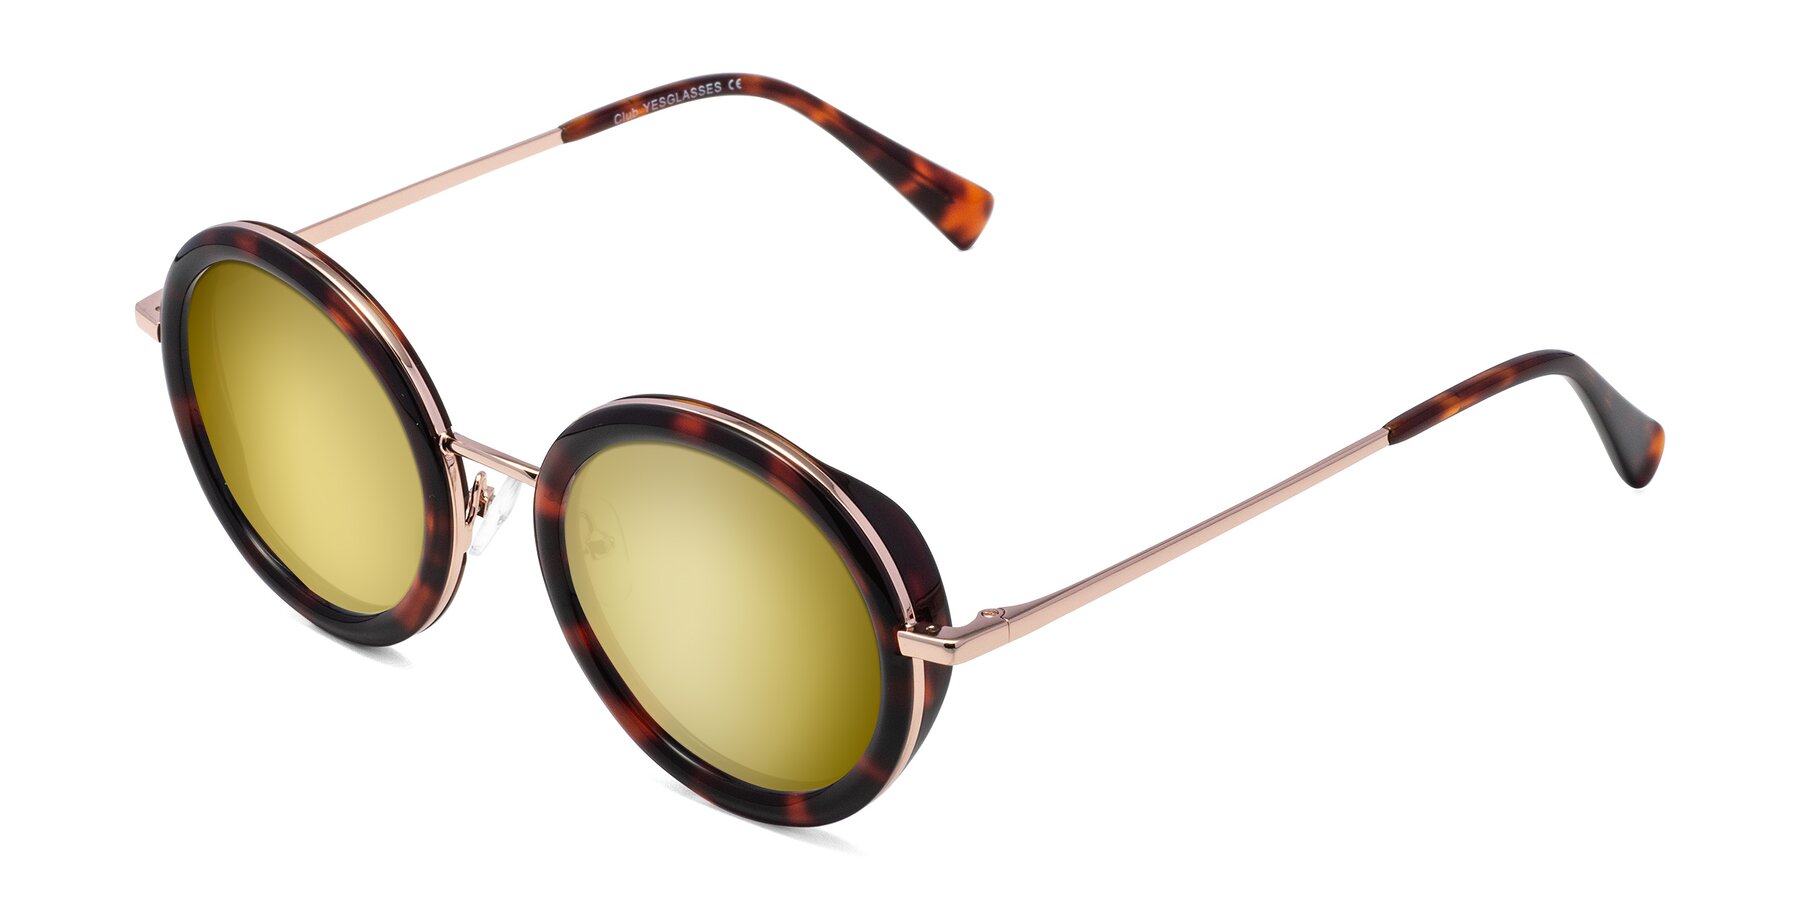 Angle of Club in Tortoise-Rose Gold with Gold Mirrored Lenses